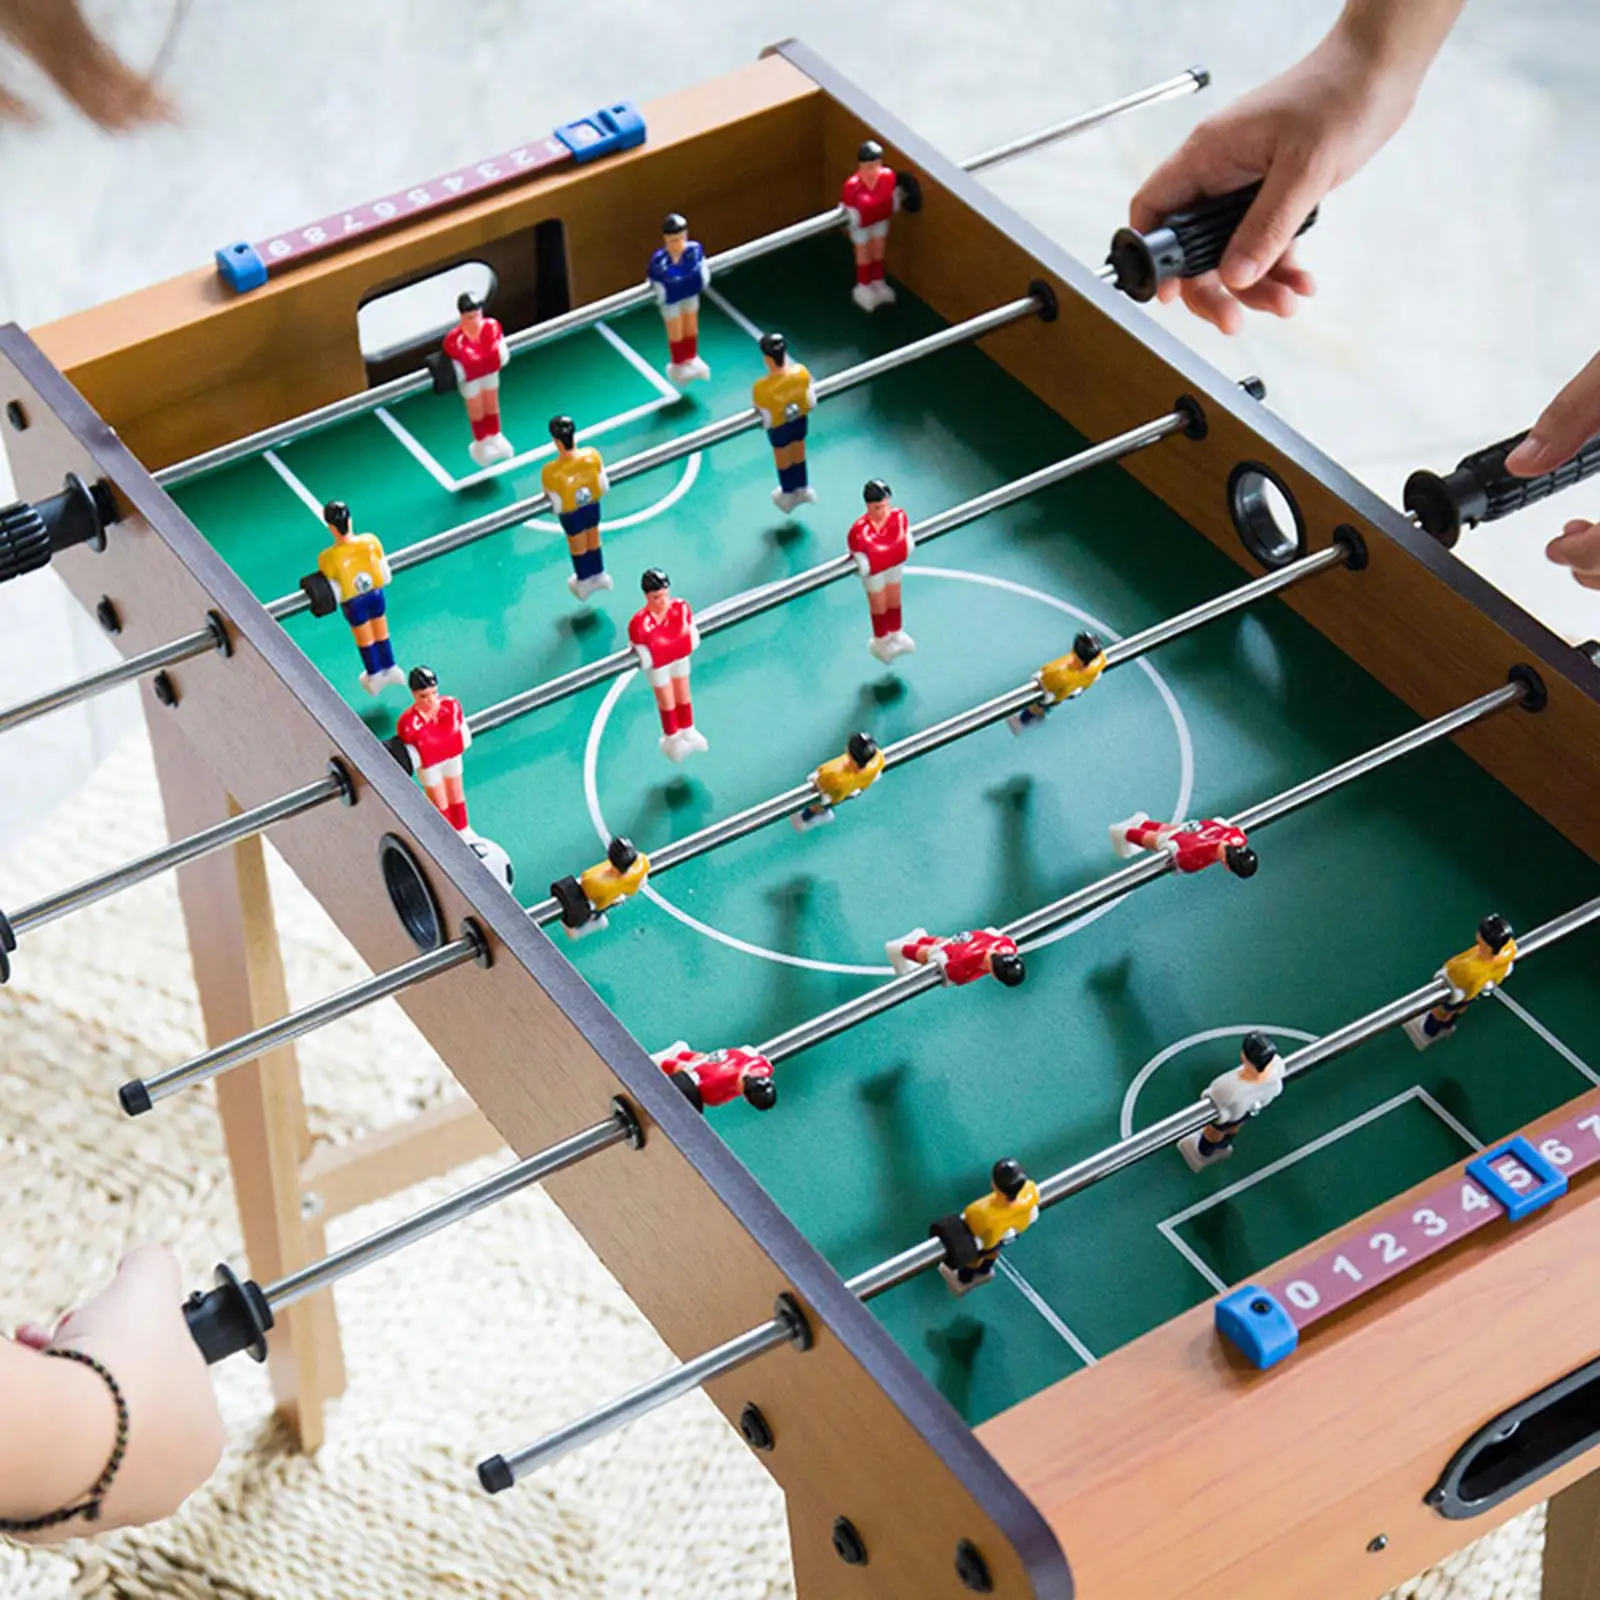 Wooden Foosball Table Tabletop Soccer Game Parent Child Interactive Toy with